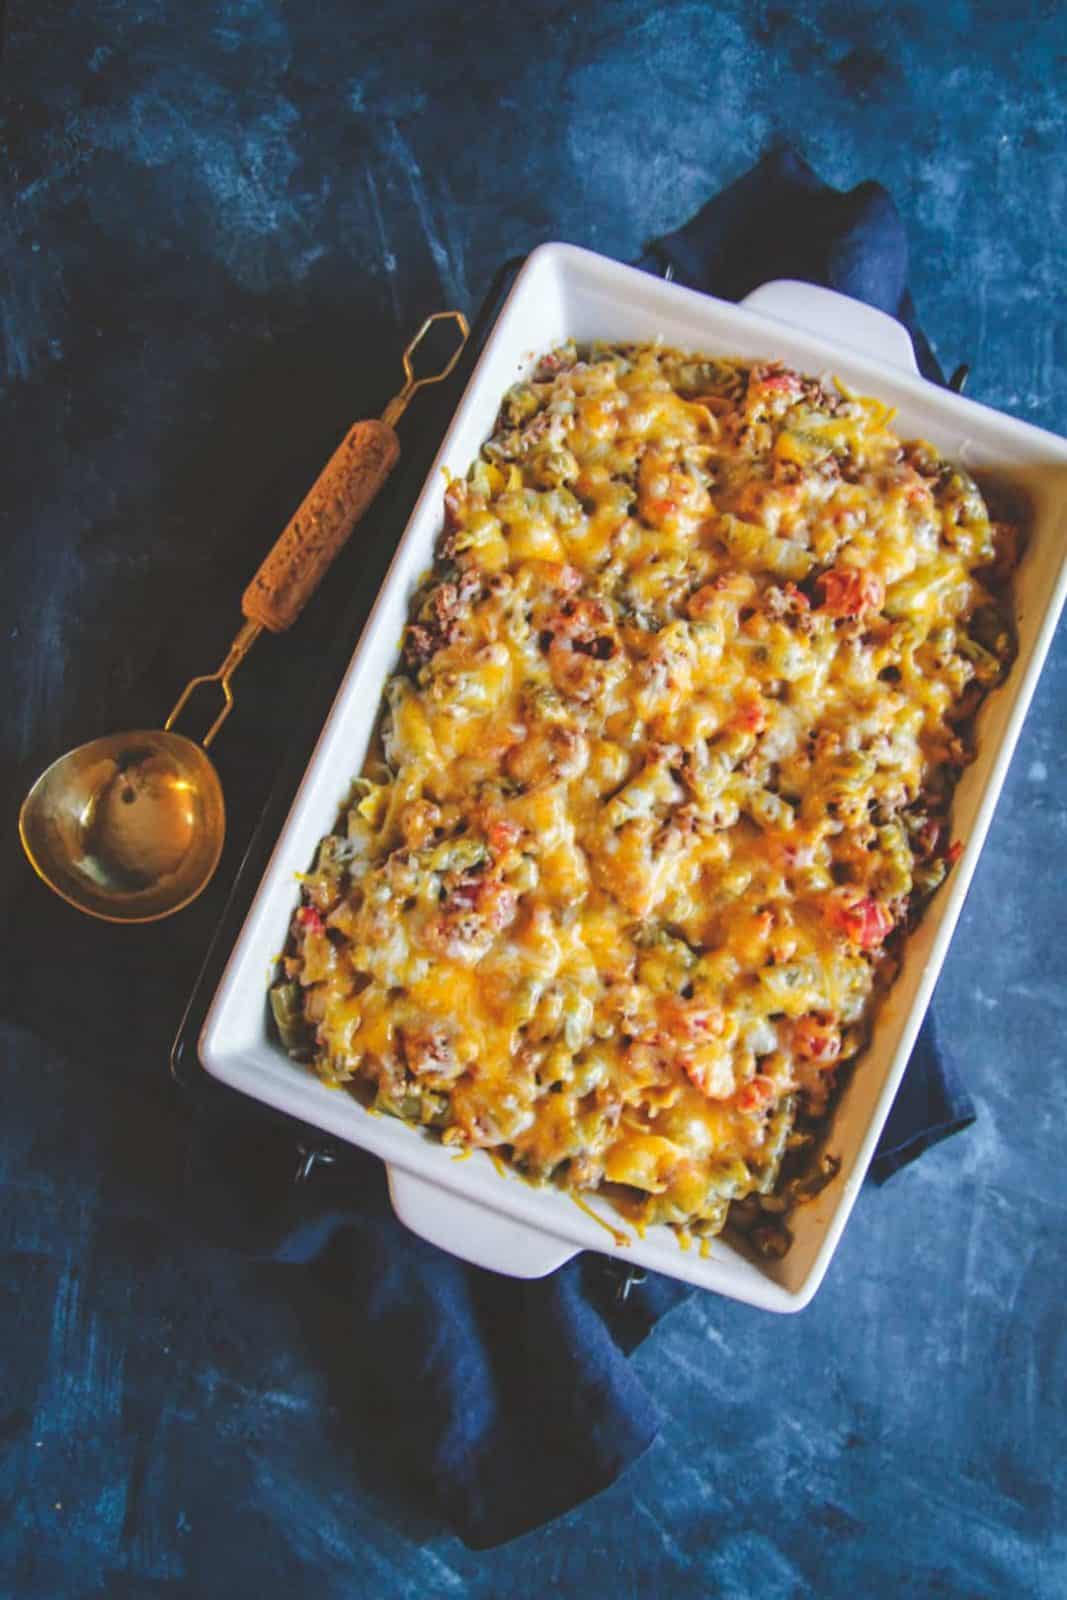 5 Ingredient Cheesy Beef and Egg Noodle Casserole Recipe